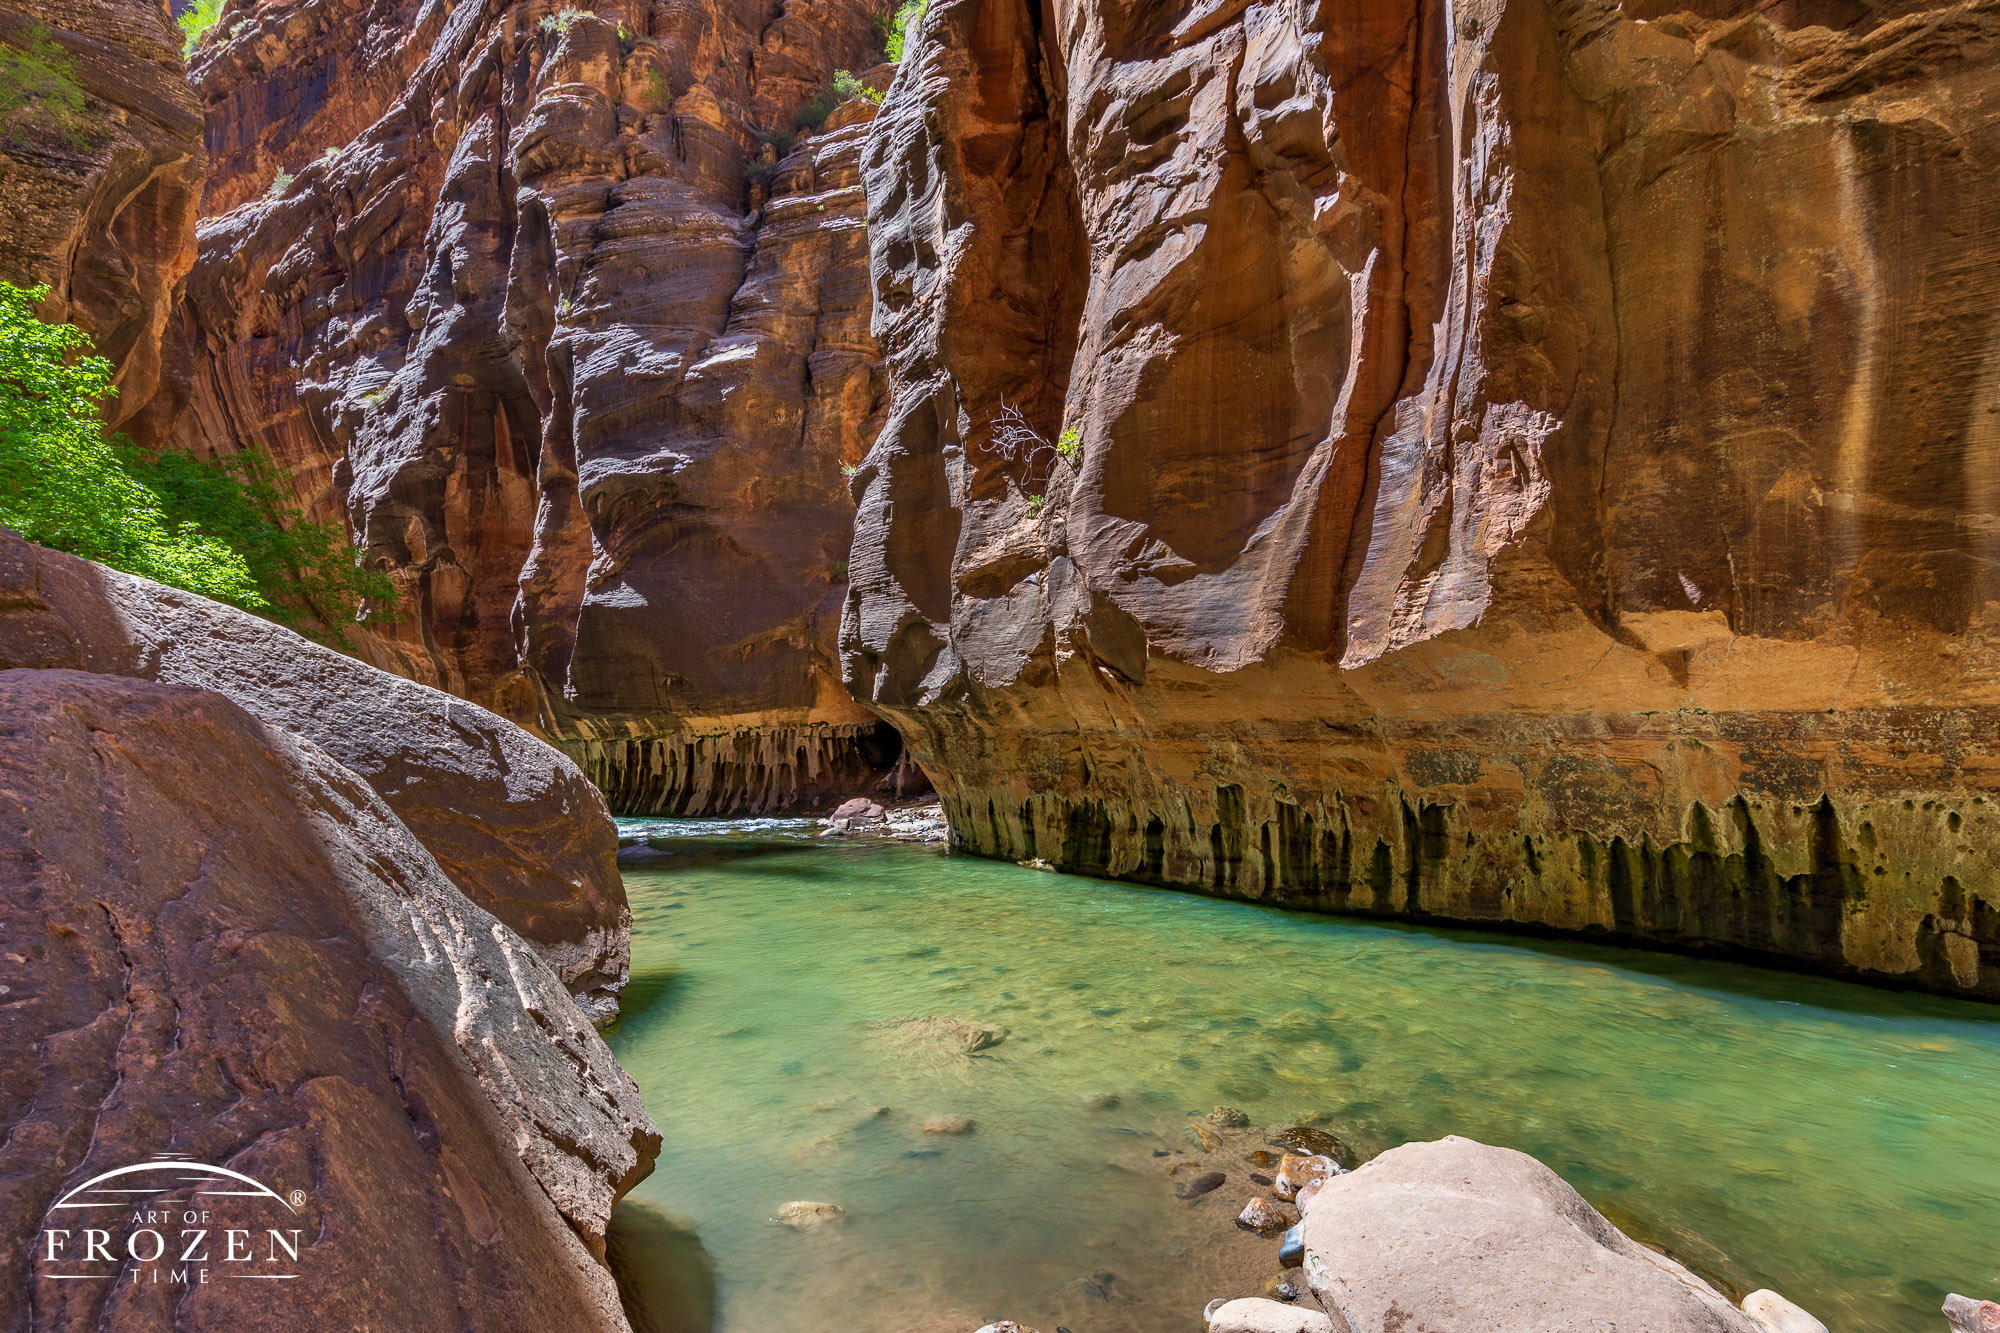 The Zion Narrows where the emerald-colored Virgin River flows around large red sandstone boulders